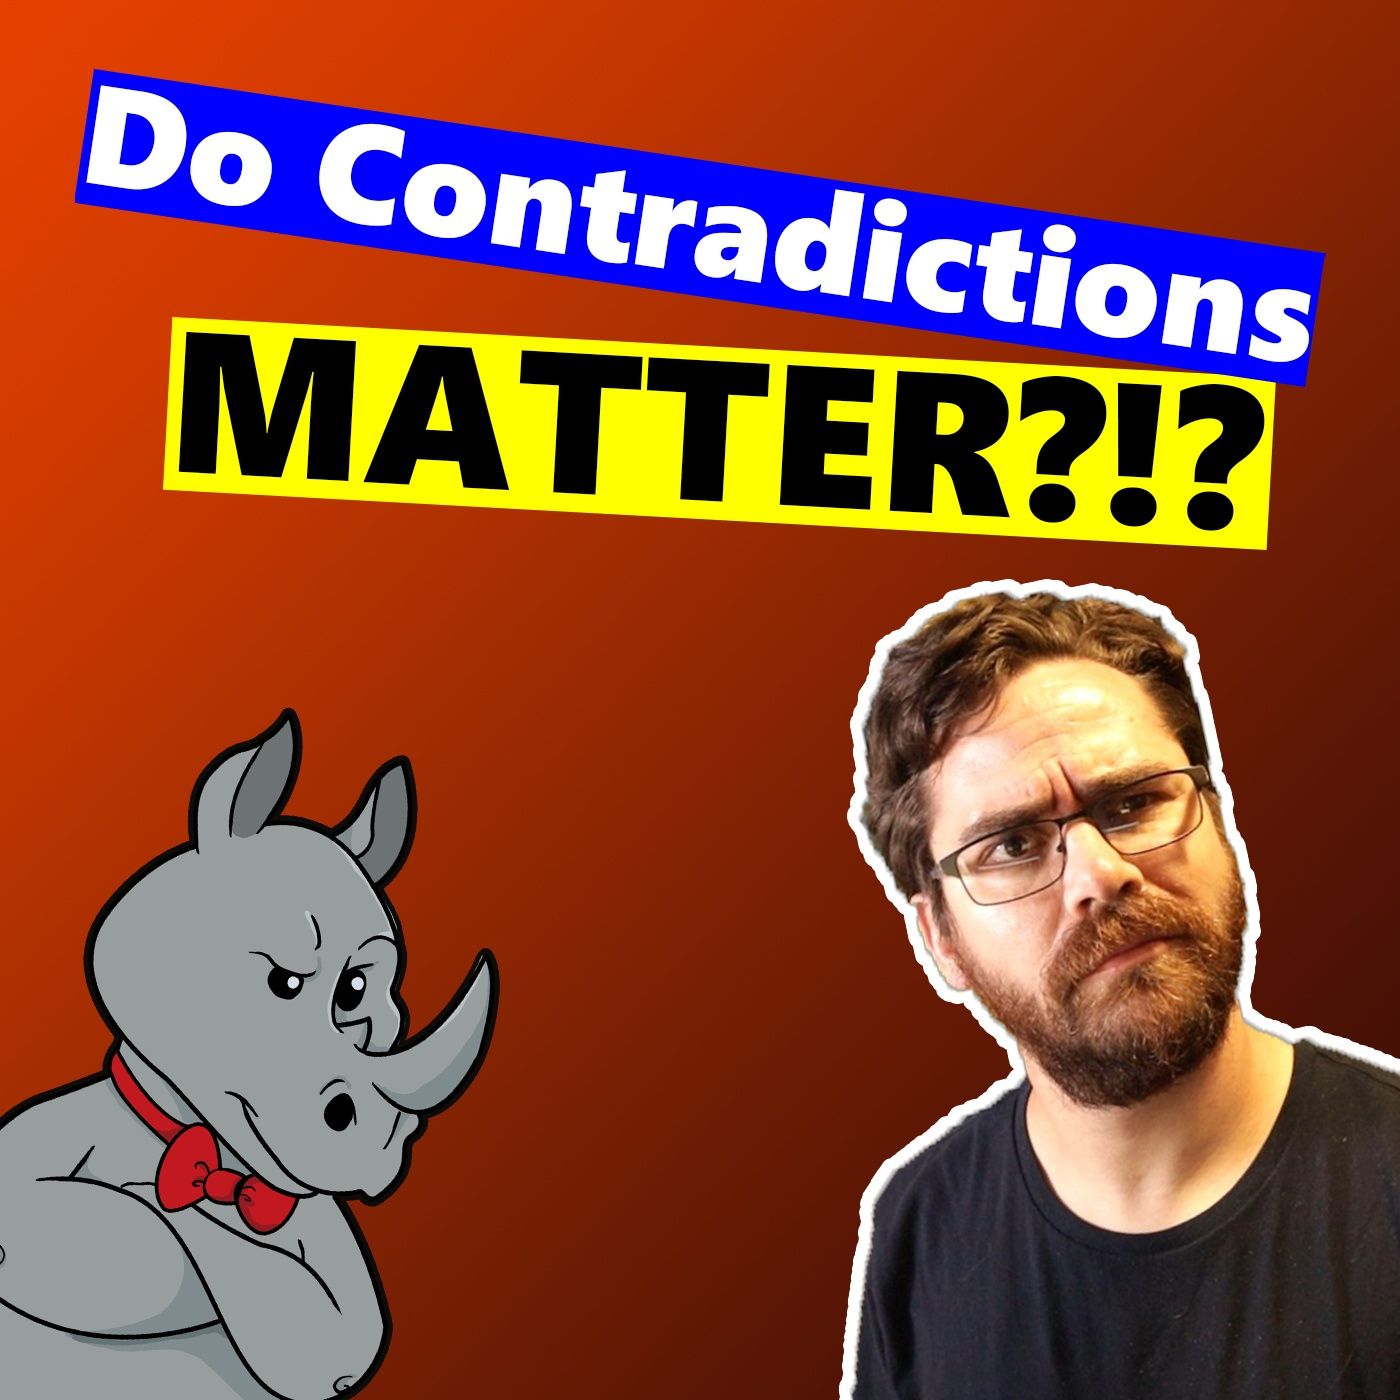 Do Contradictions Prove the Bible Wrong?